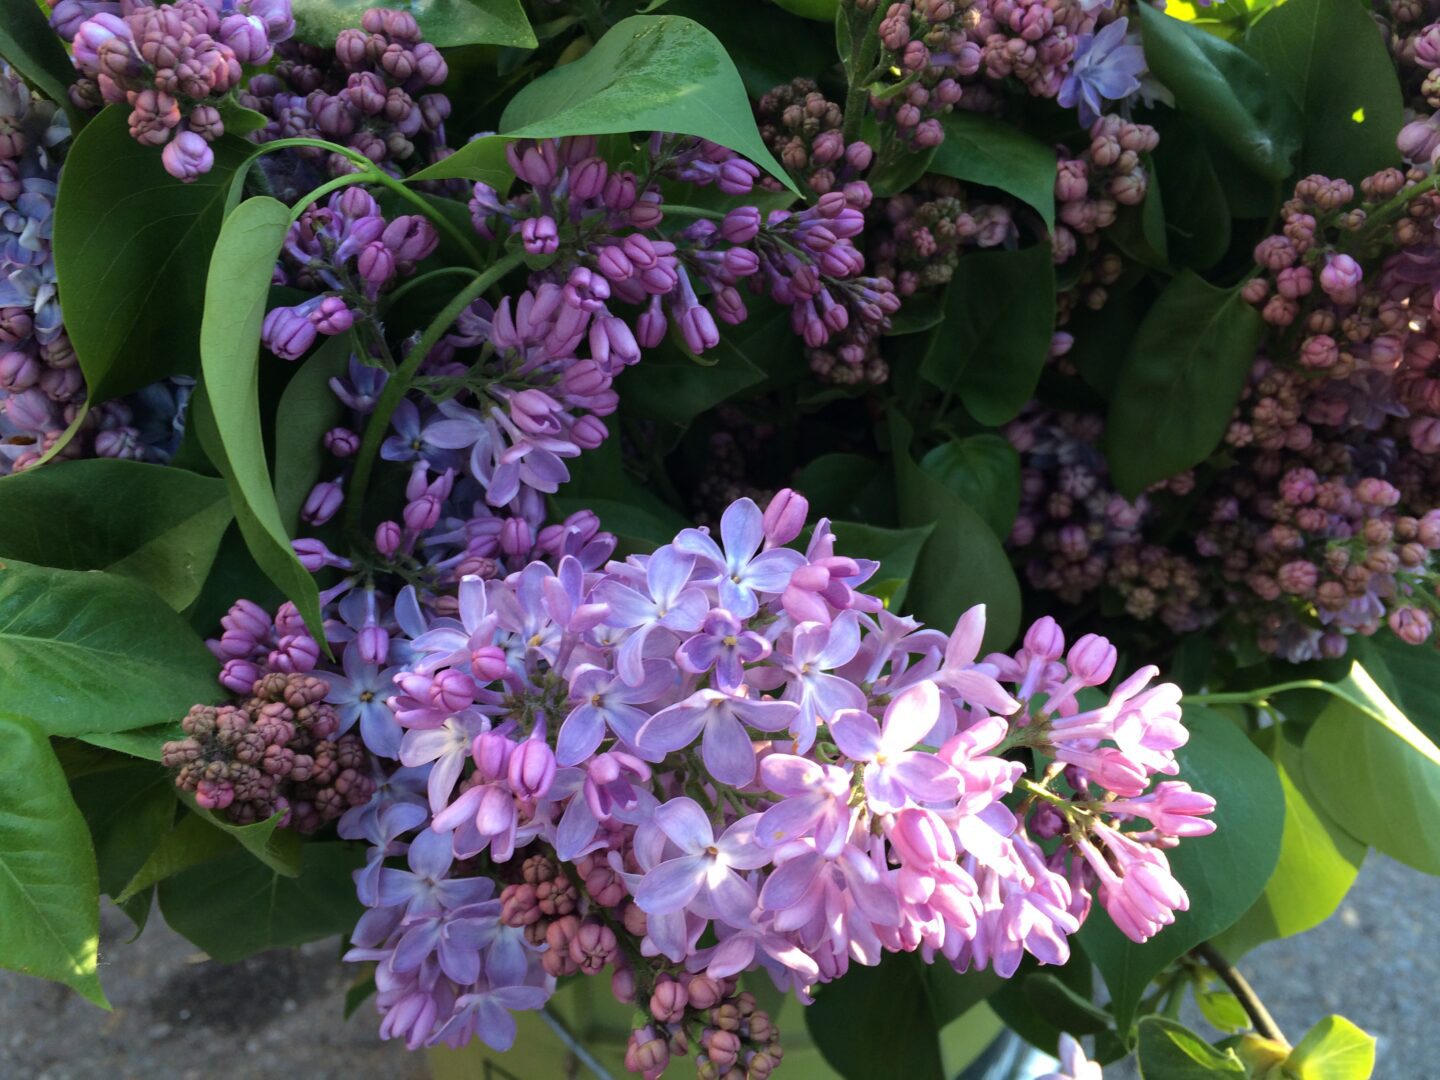 A bunch of purple lilacs in a pot.